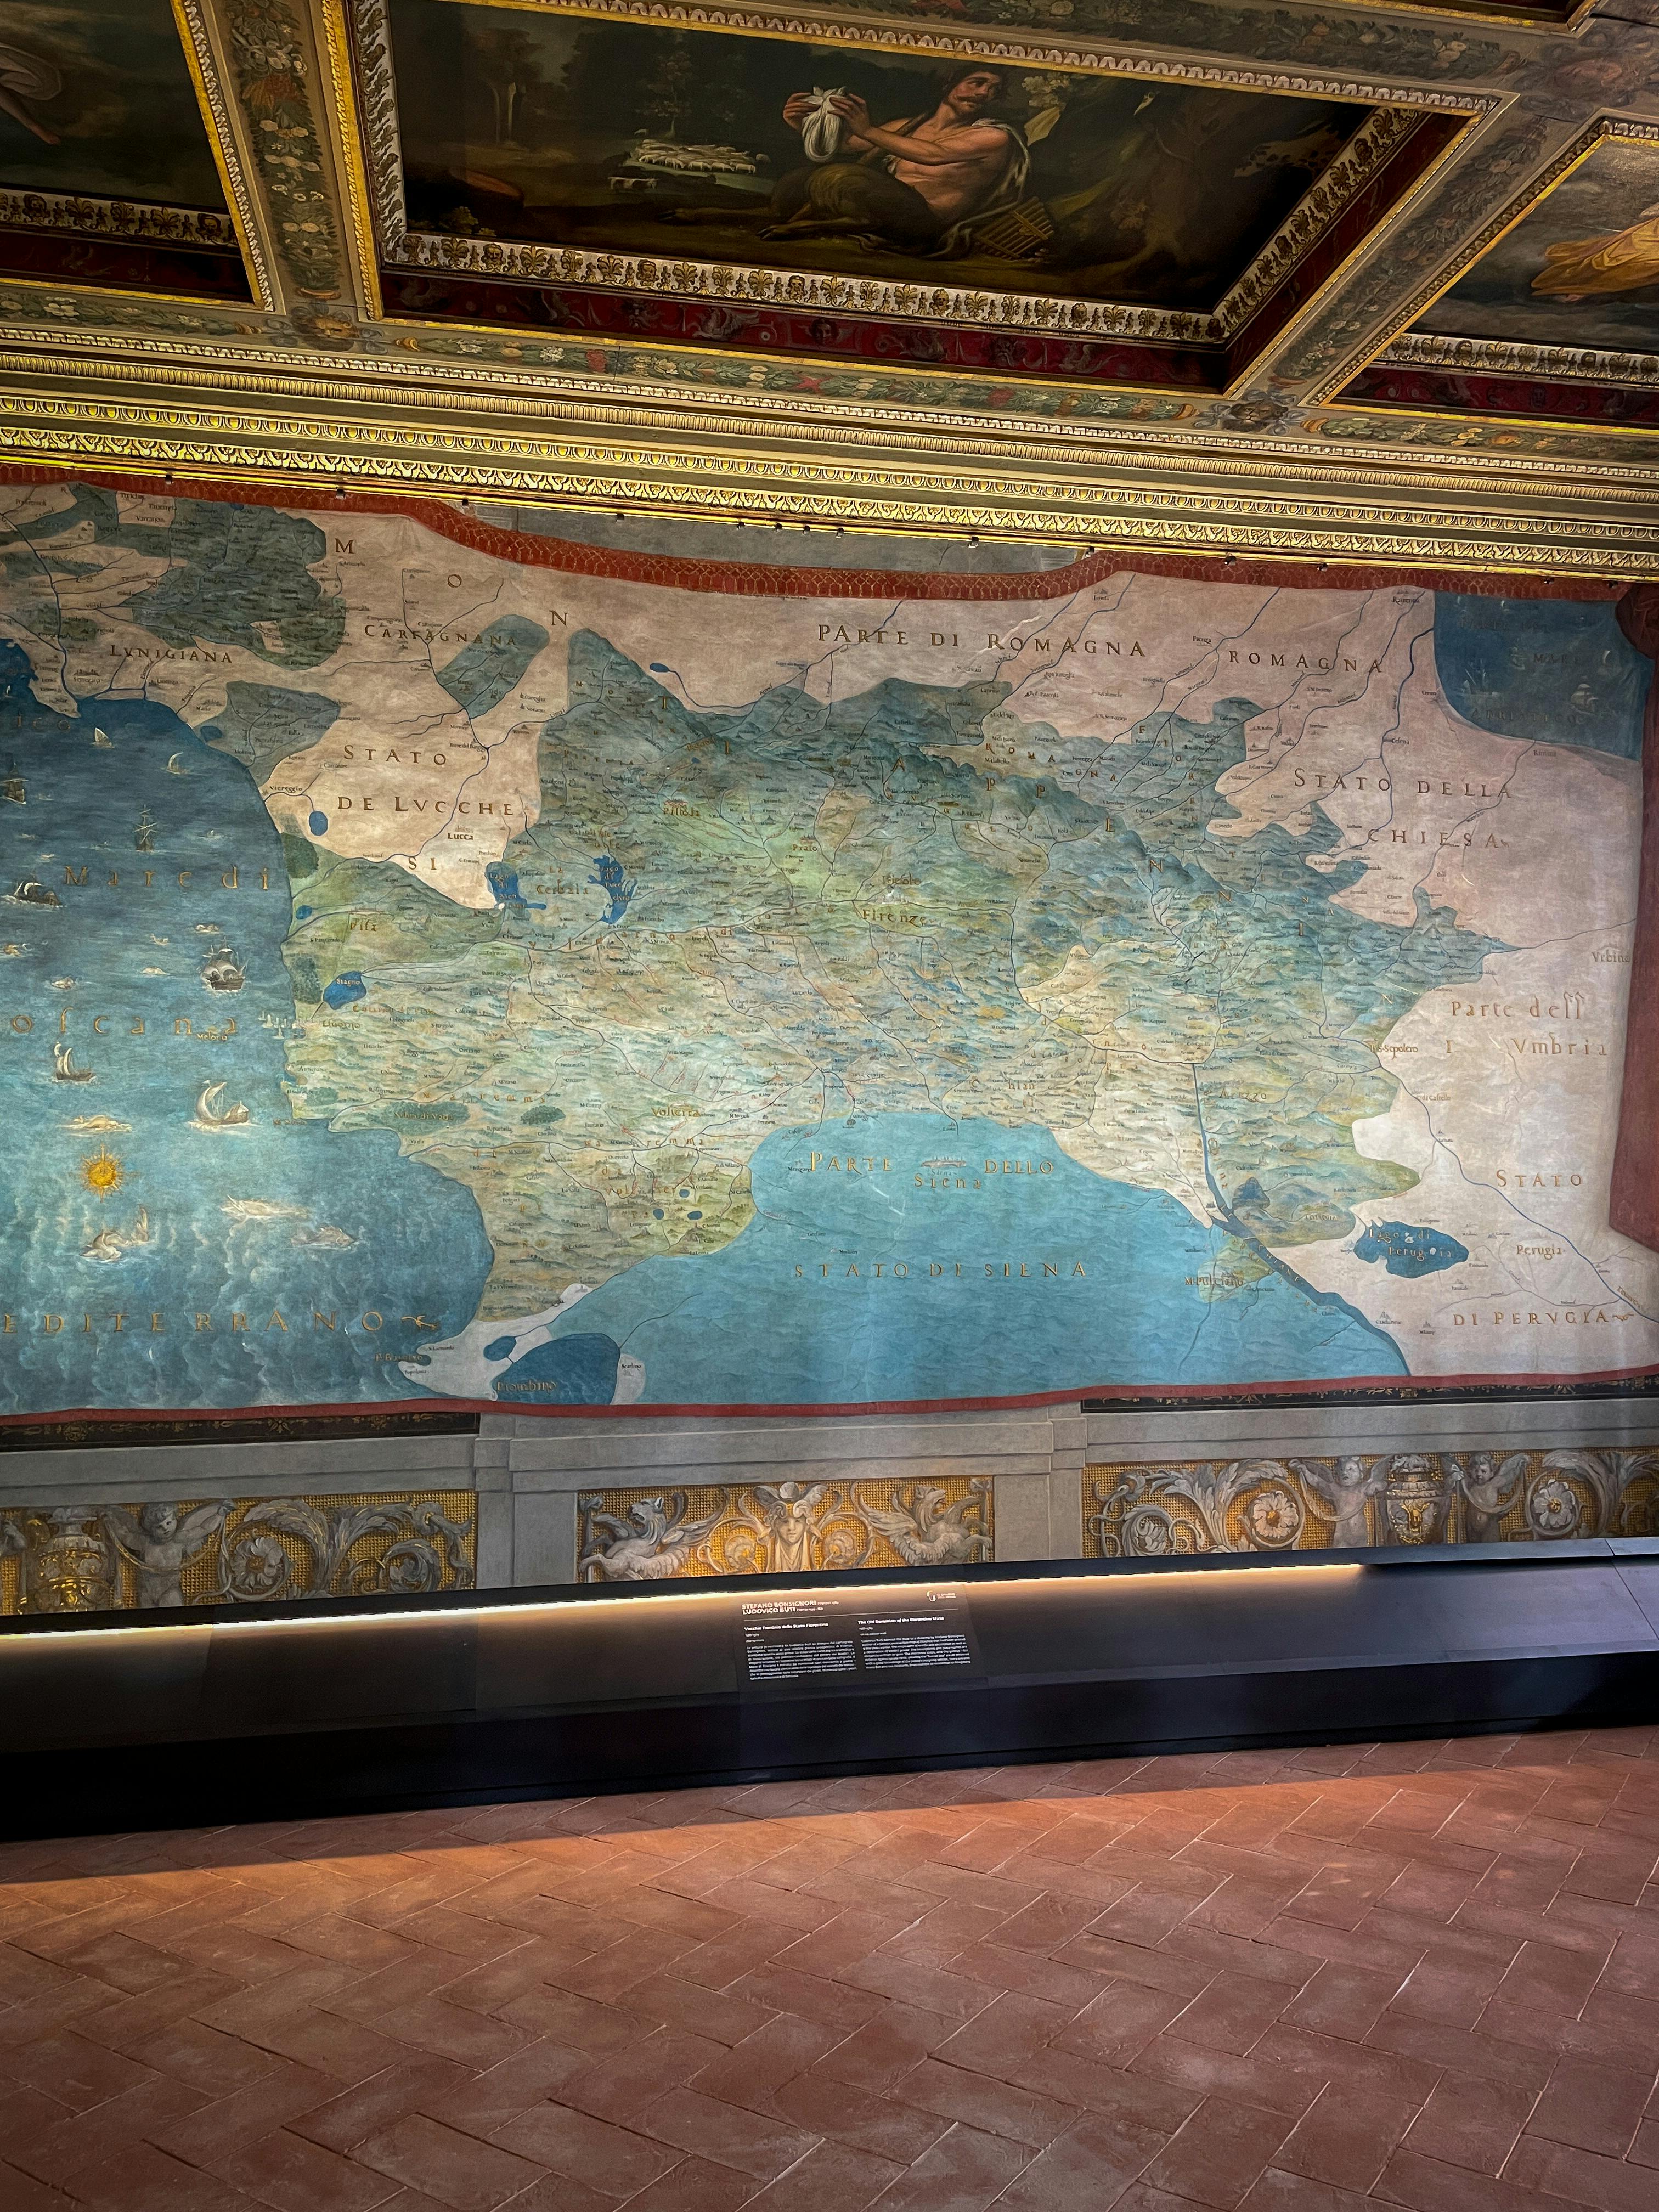 The Terrace of the Map Room of the Uffizi